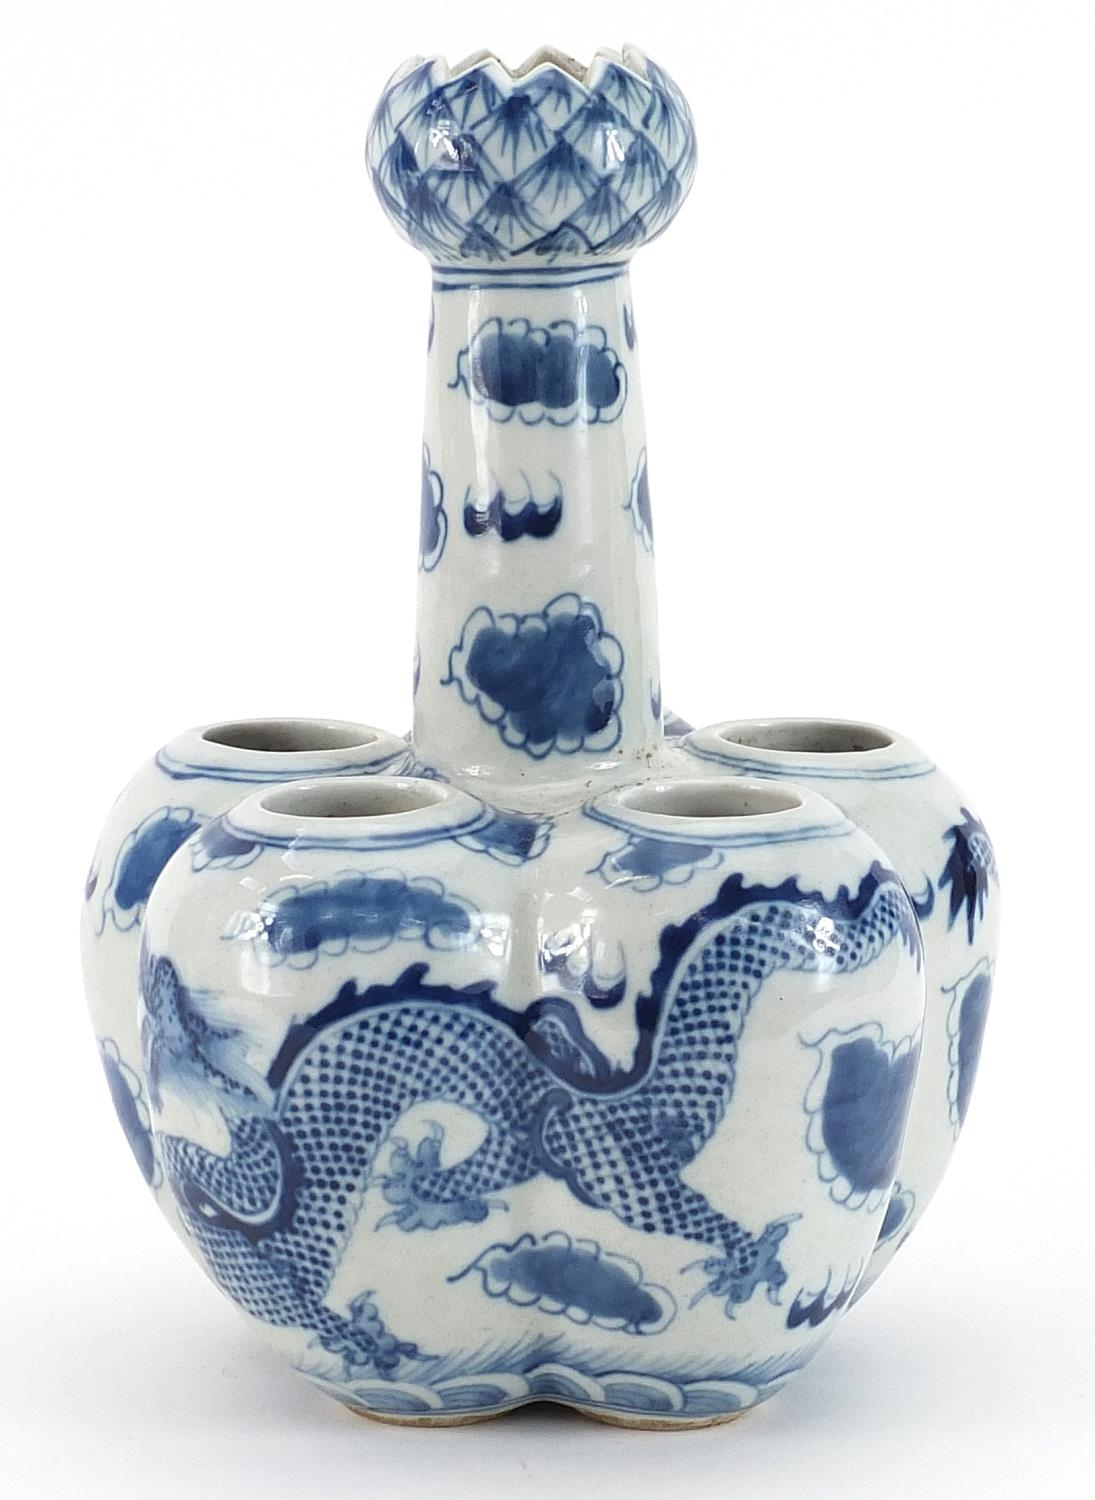 Chinese blue and white porcelain tulip vase hand painted with dragons chasing a flaming pearl - Image 2 of 3